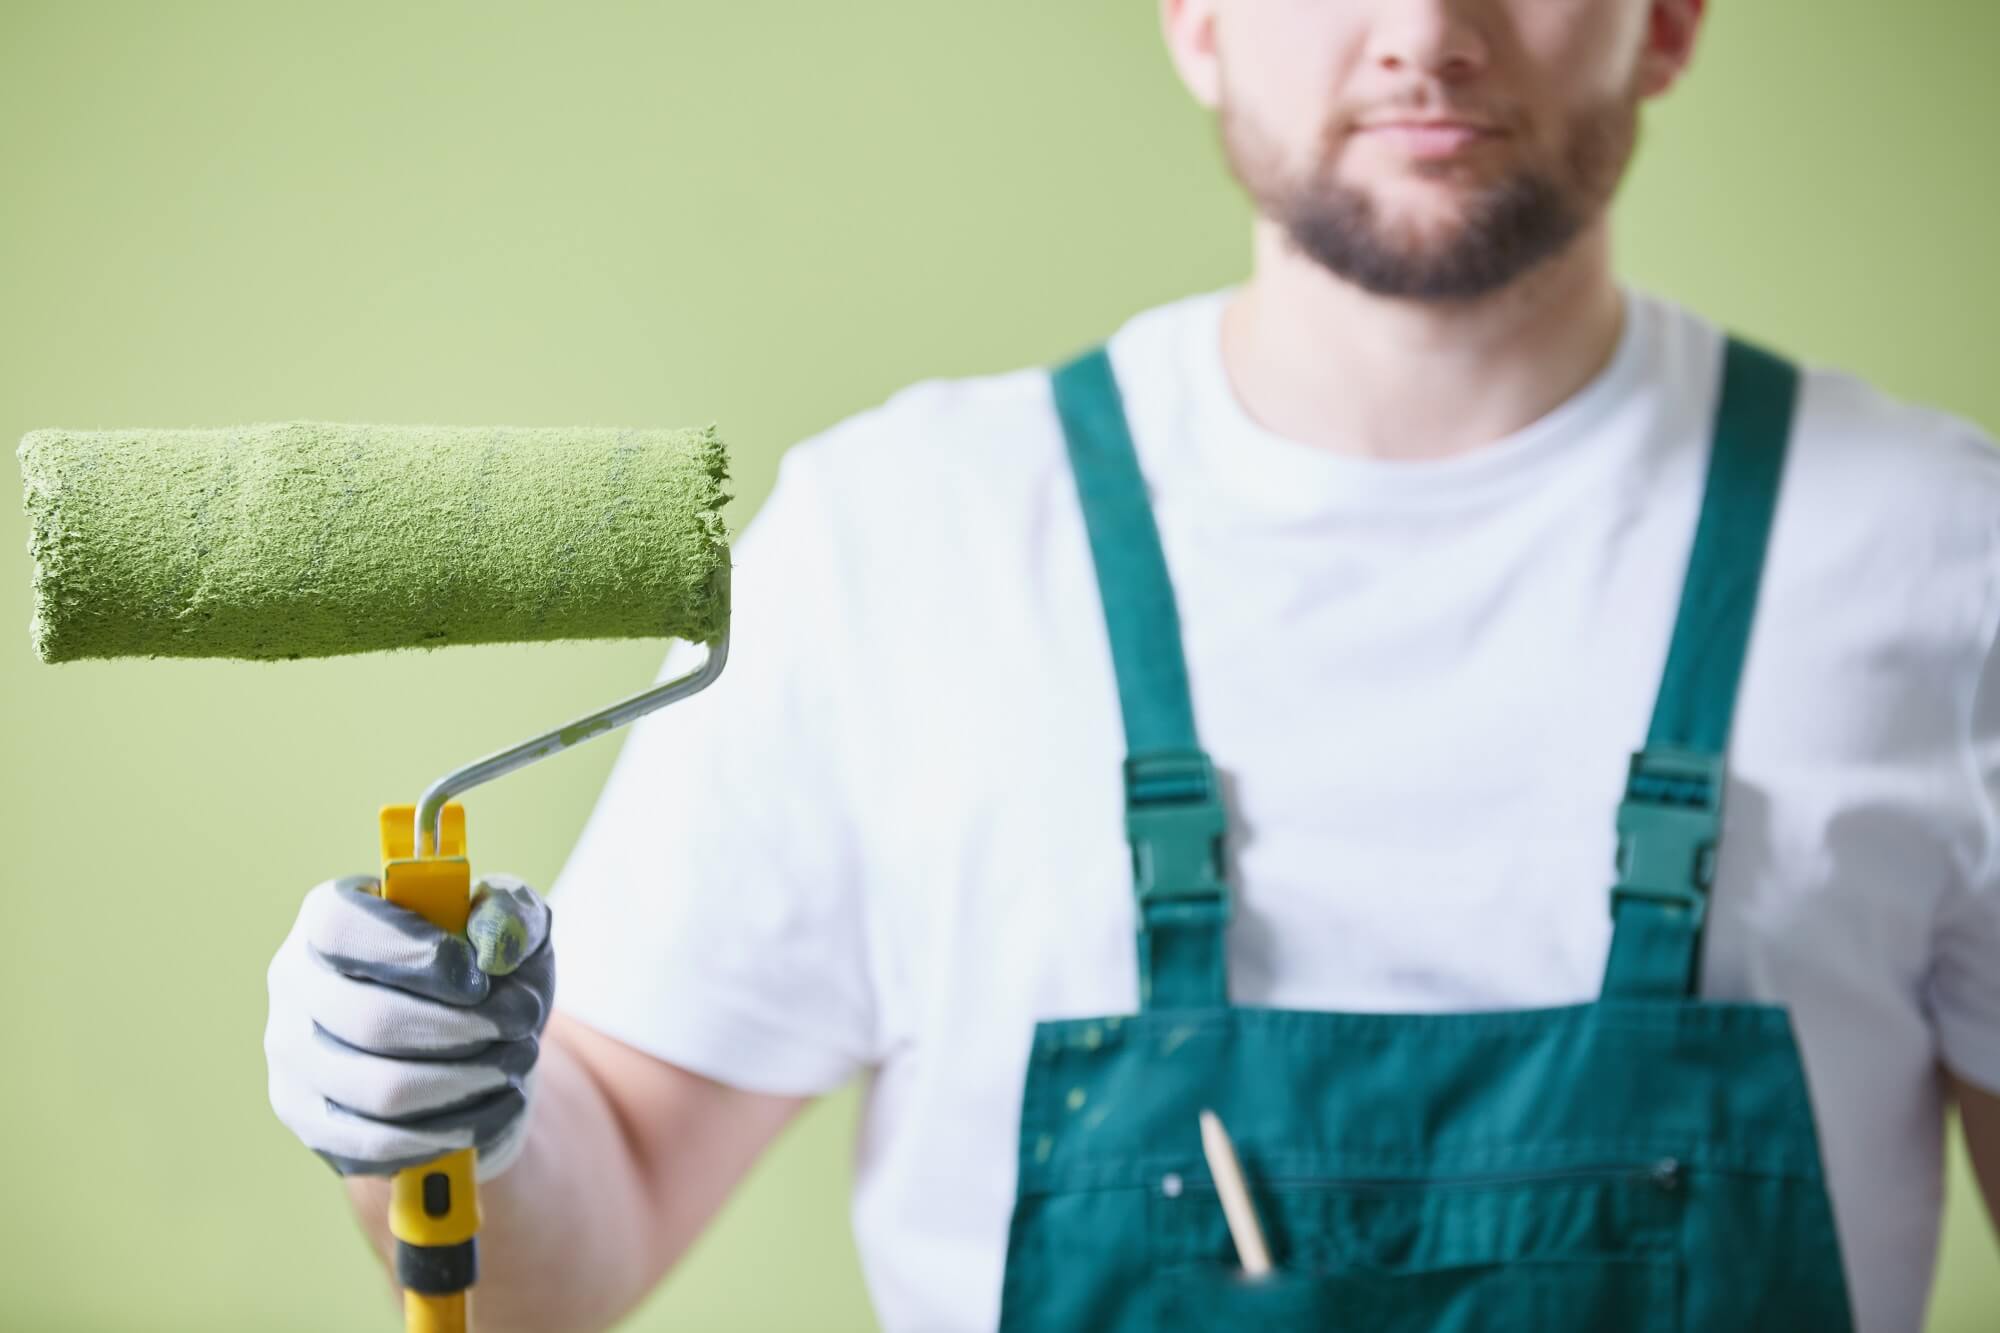 Man holding green paint roller prepared to paint the room